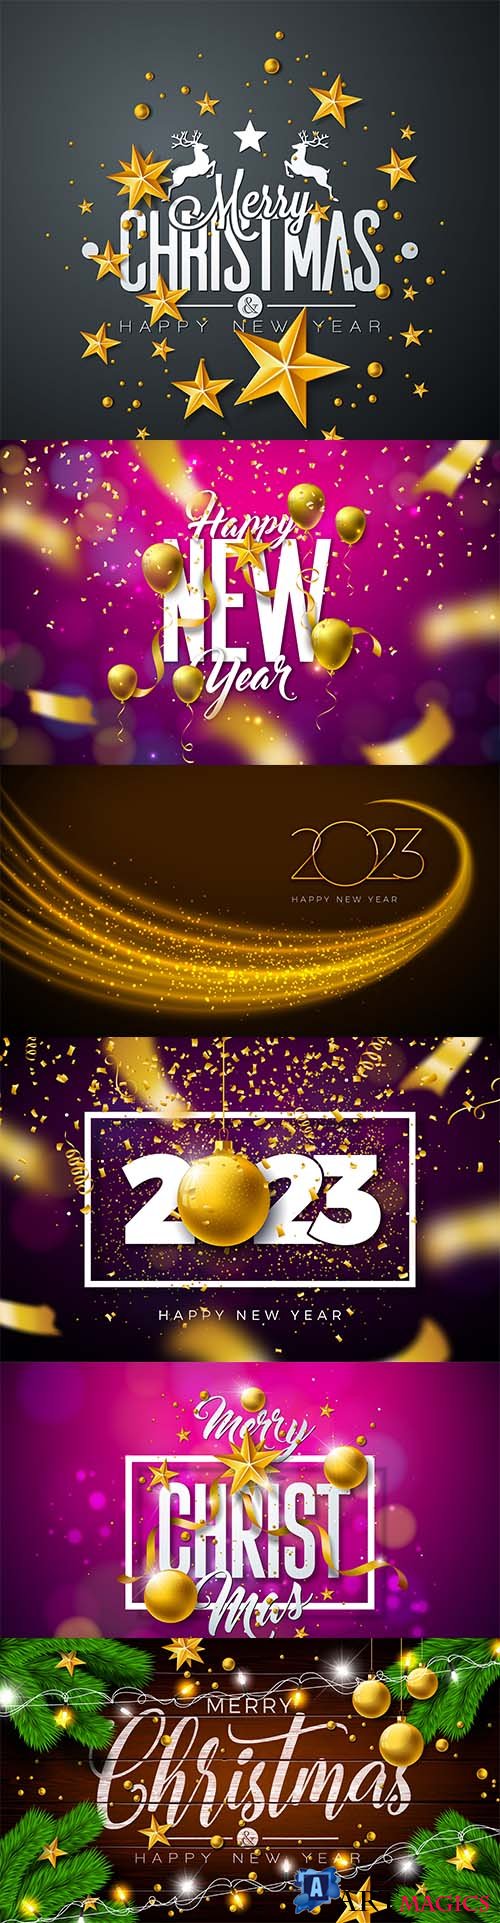 Merry christmas and happy new year illustration with gold glass ball, star and light garland